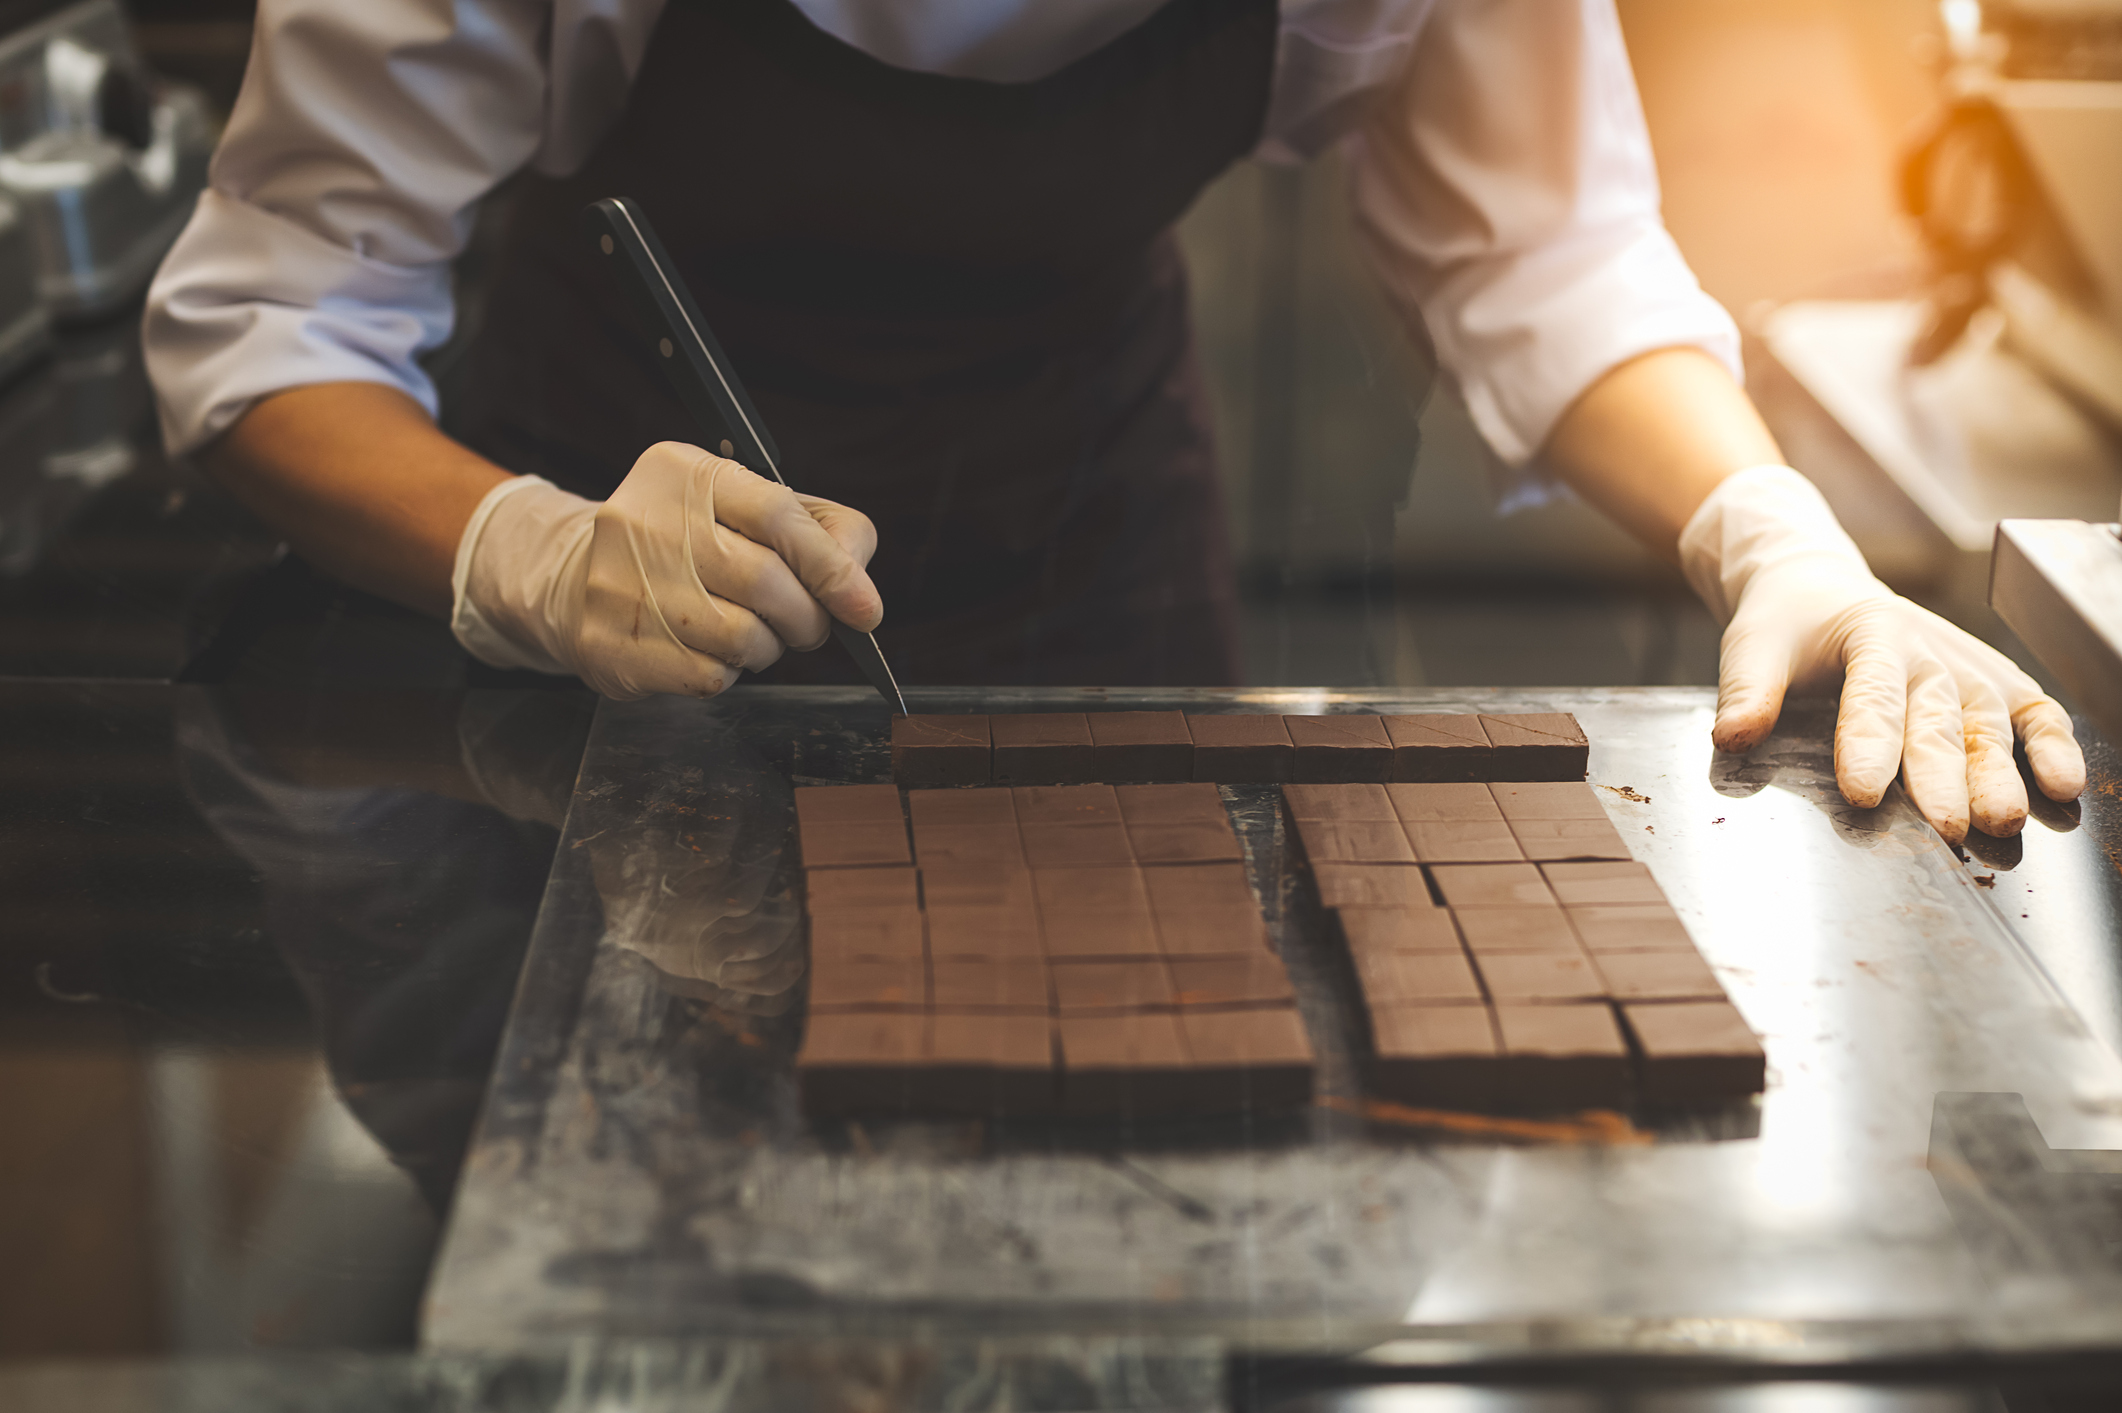 Chef cutting homemade chocolate in kitchen.